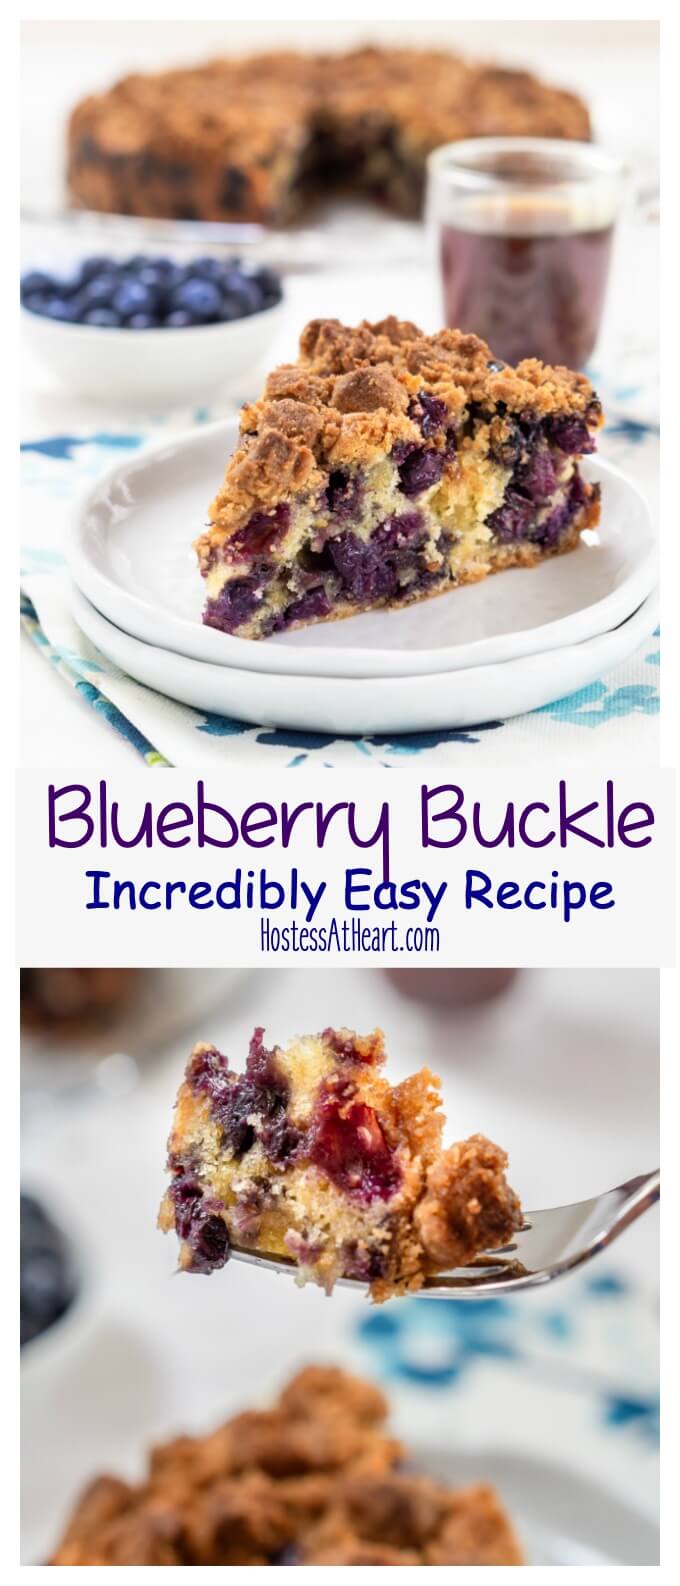 Blueberry Buckle collage showing a wedge of this coffee cake loaded with berries and topped with the slightly crunchy sweet streusel.